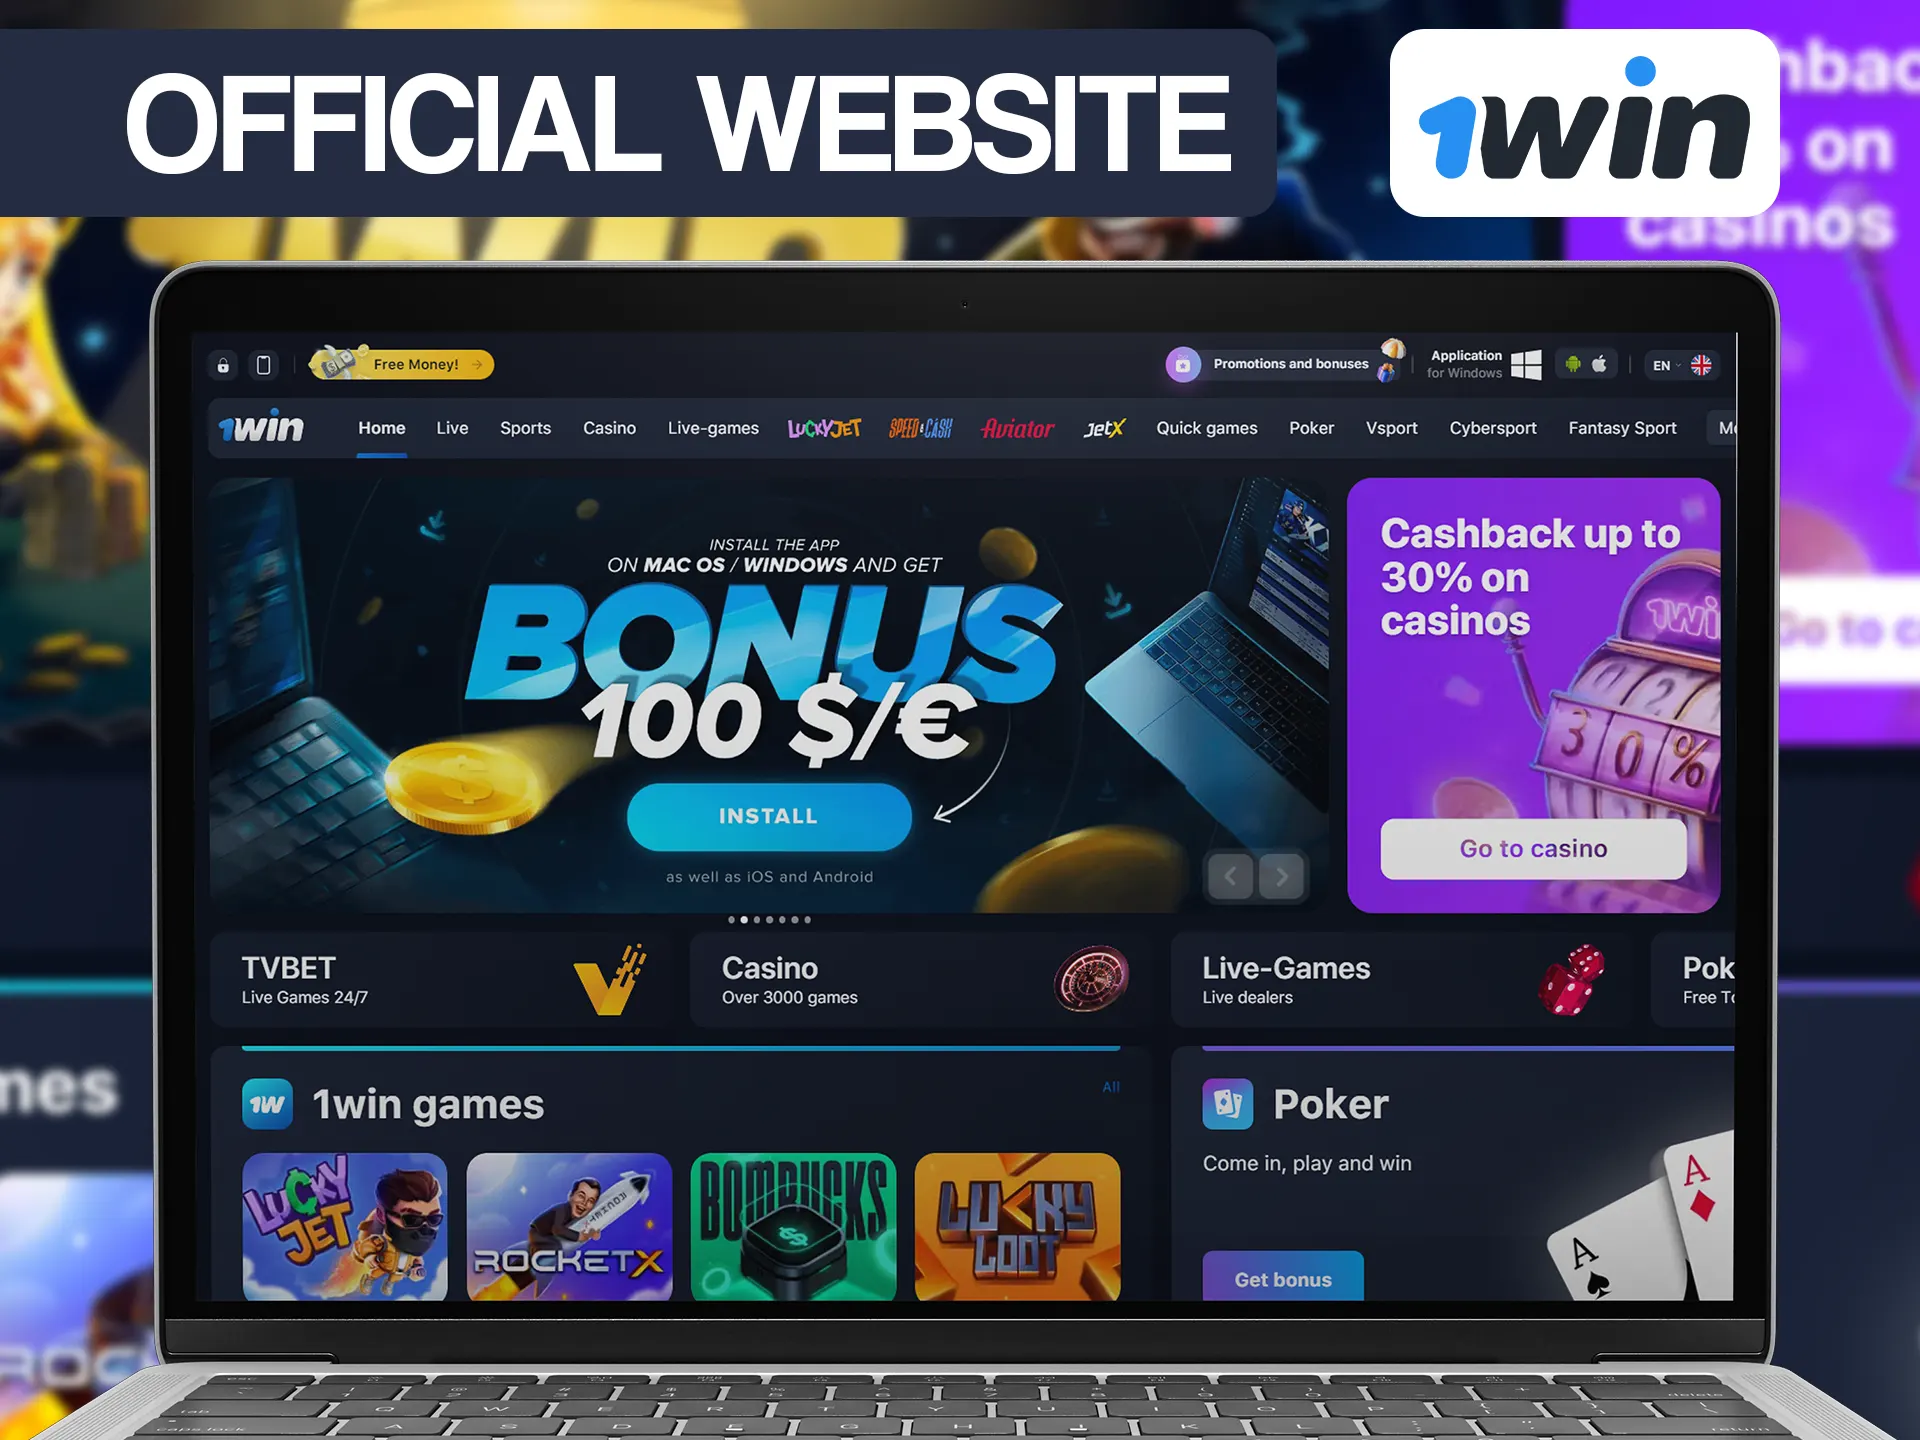 1win official website has new additional features.